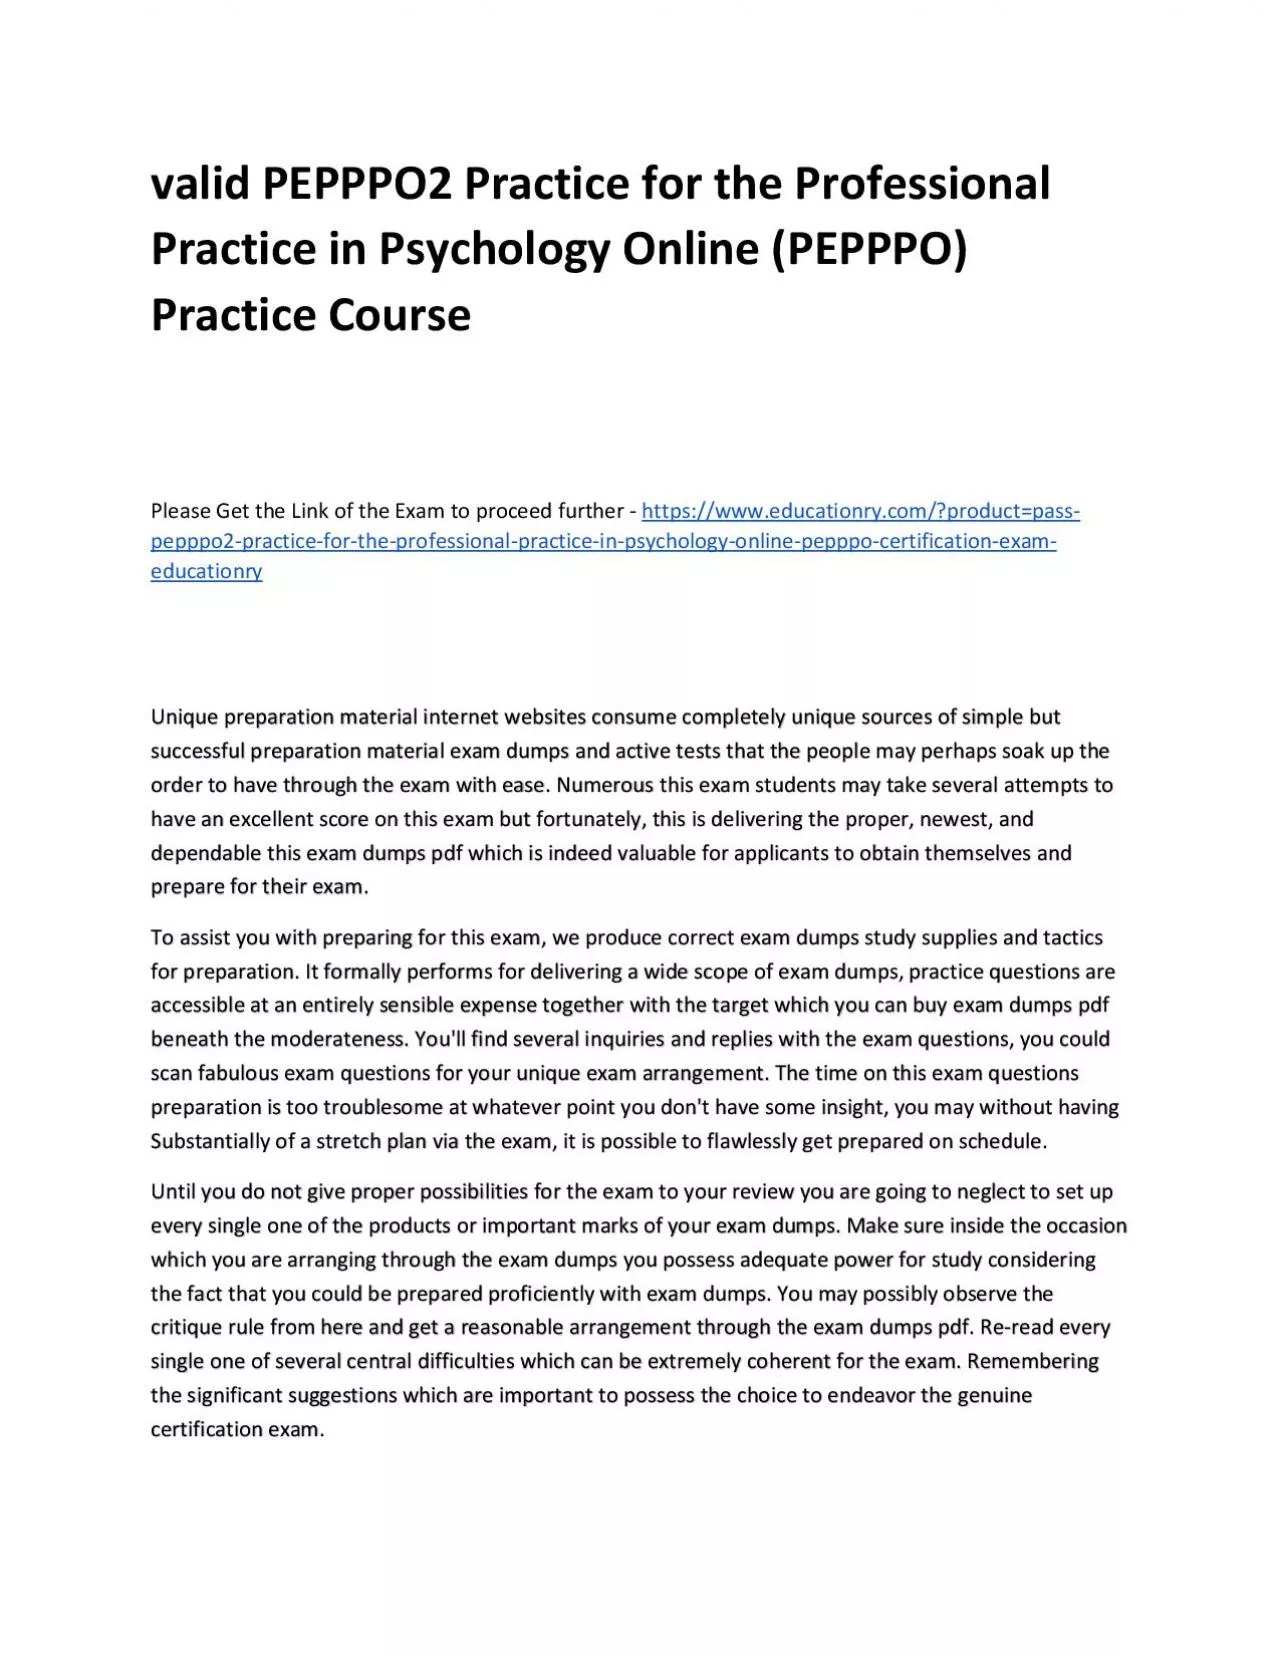 Valid PEPPPO2 Practice for the Professional Practice in Psychology Online (PEPPPO) Practice